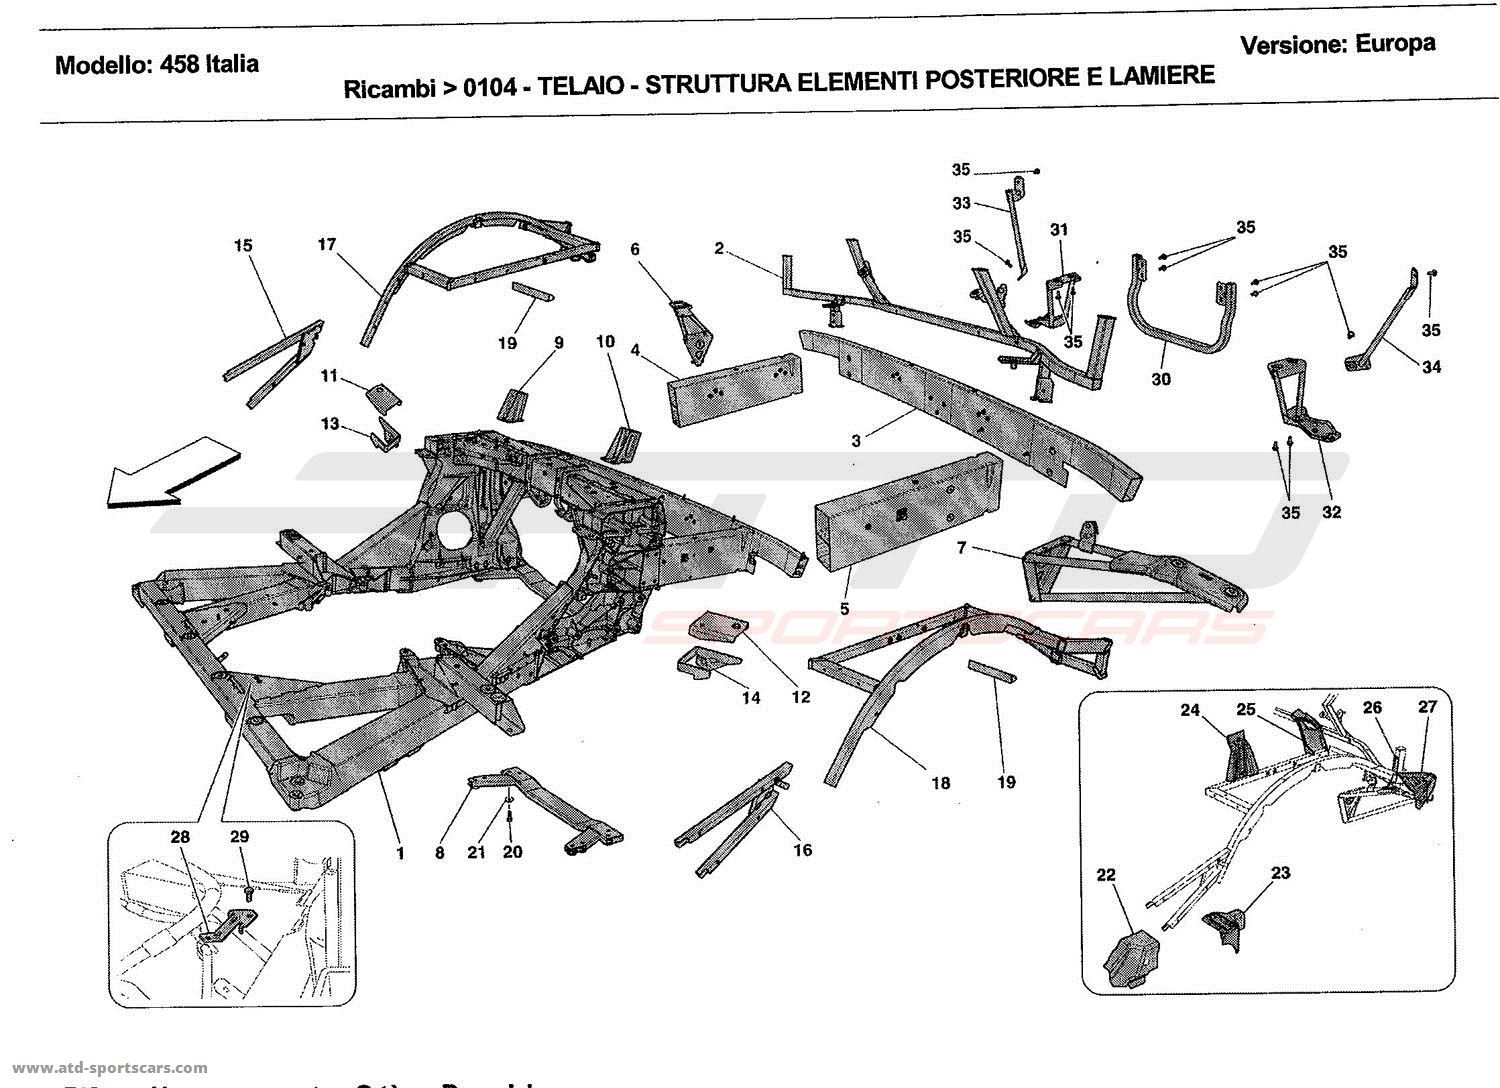 FRAME - REAR ELEMENTS STRUCTURES AND PLATES